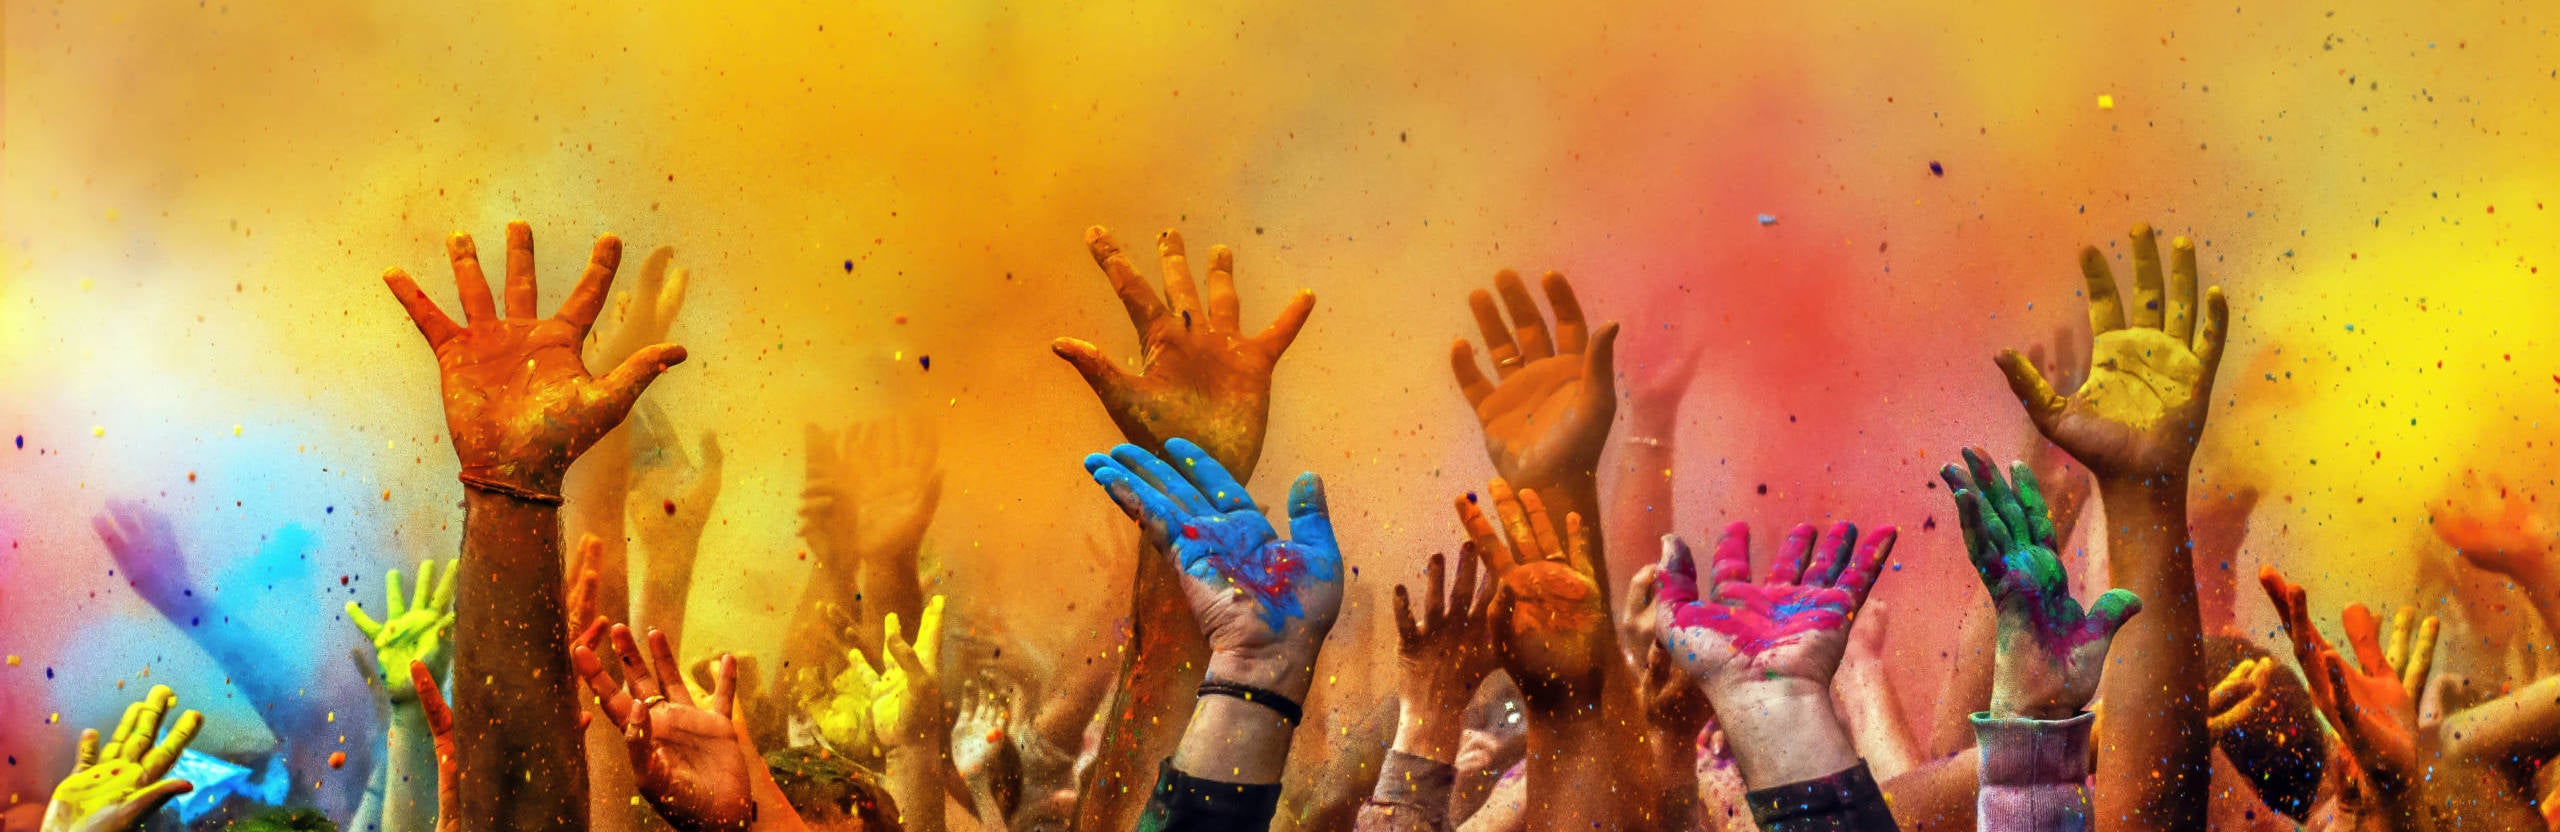 Hands painted with different colors raised up on Holi festival, Washington DC, USA